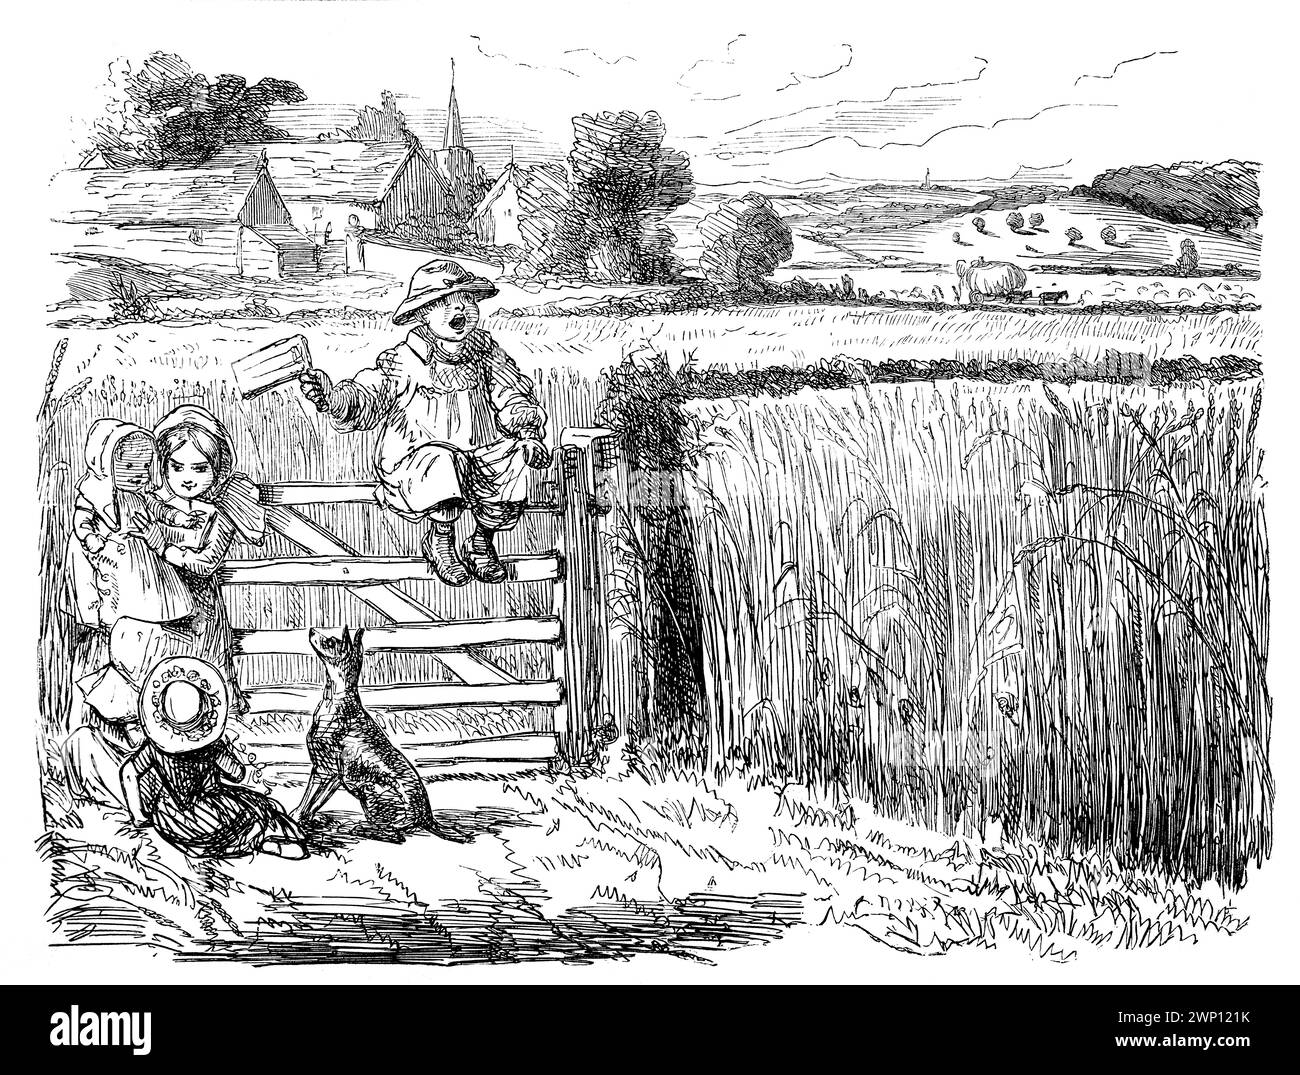 An English Gold Field, political cartoon showing country life at the time of the California Gold Rush, from 1852 Punch Magazine Stock Photo